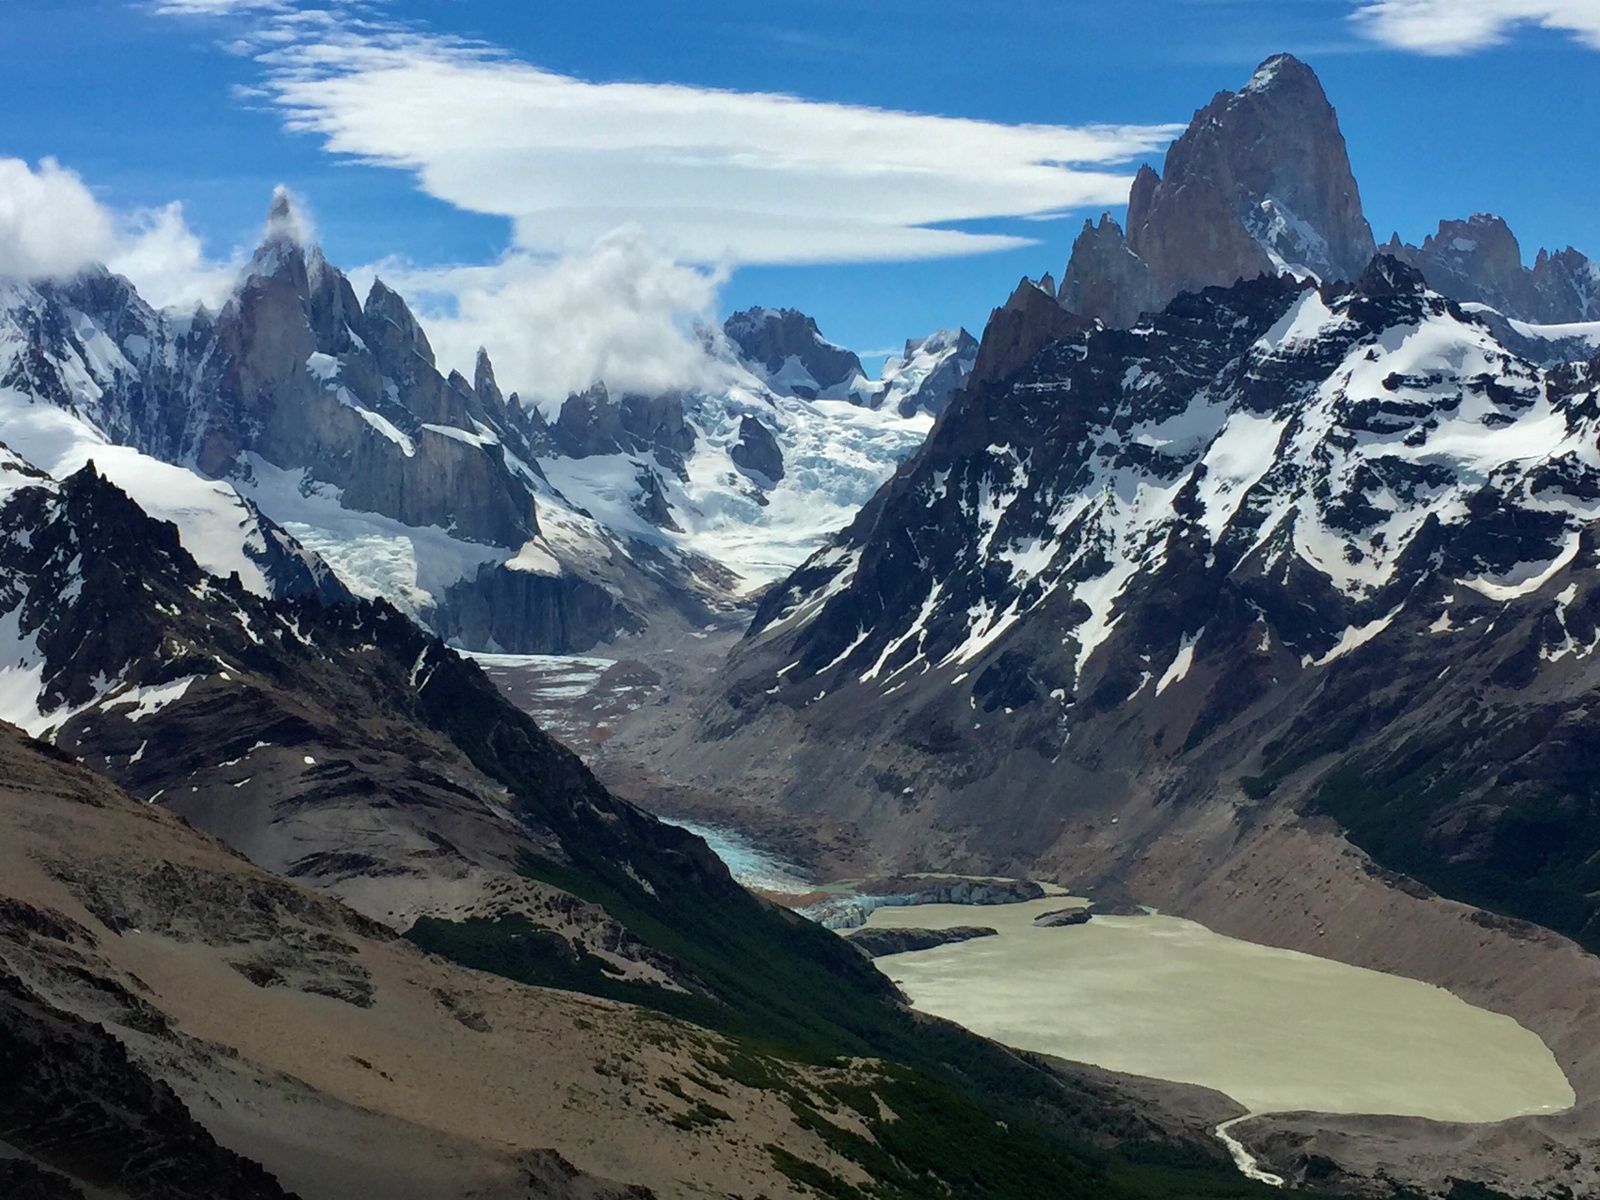 Backed by Fitzroy and Cerro Torre, Los Glaciares NP, Argentina